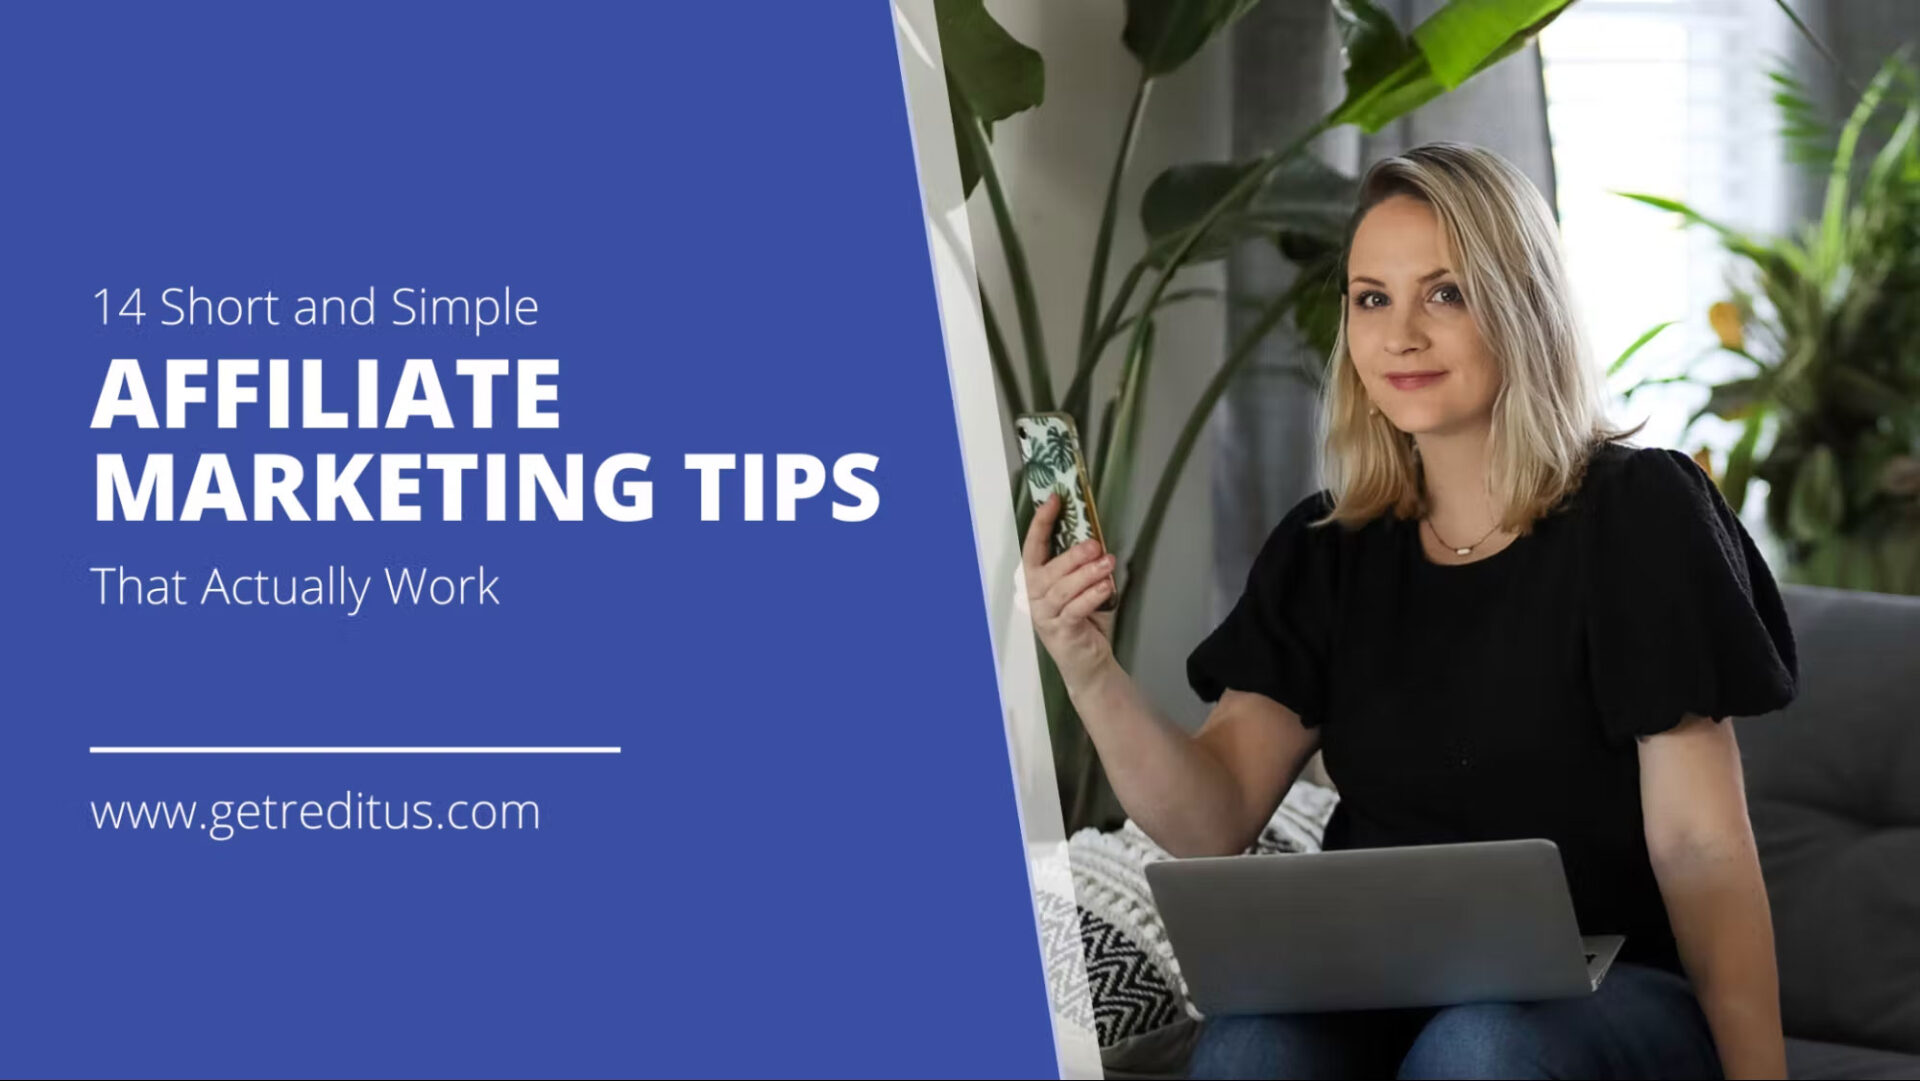 14 Short and Simple Affiliate Marketing Tips